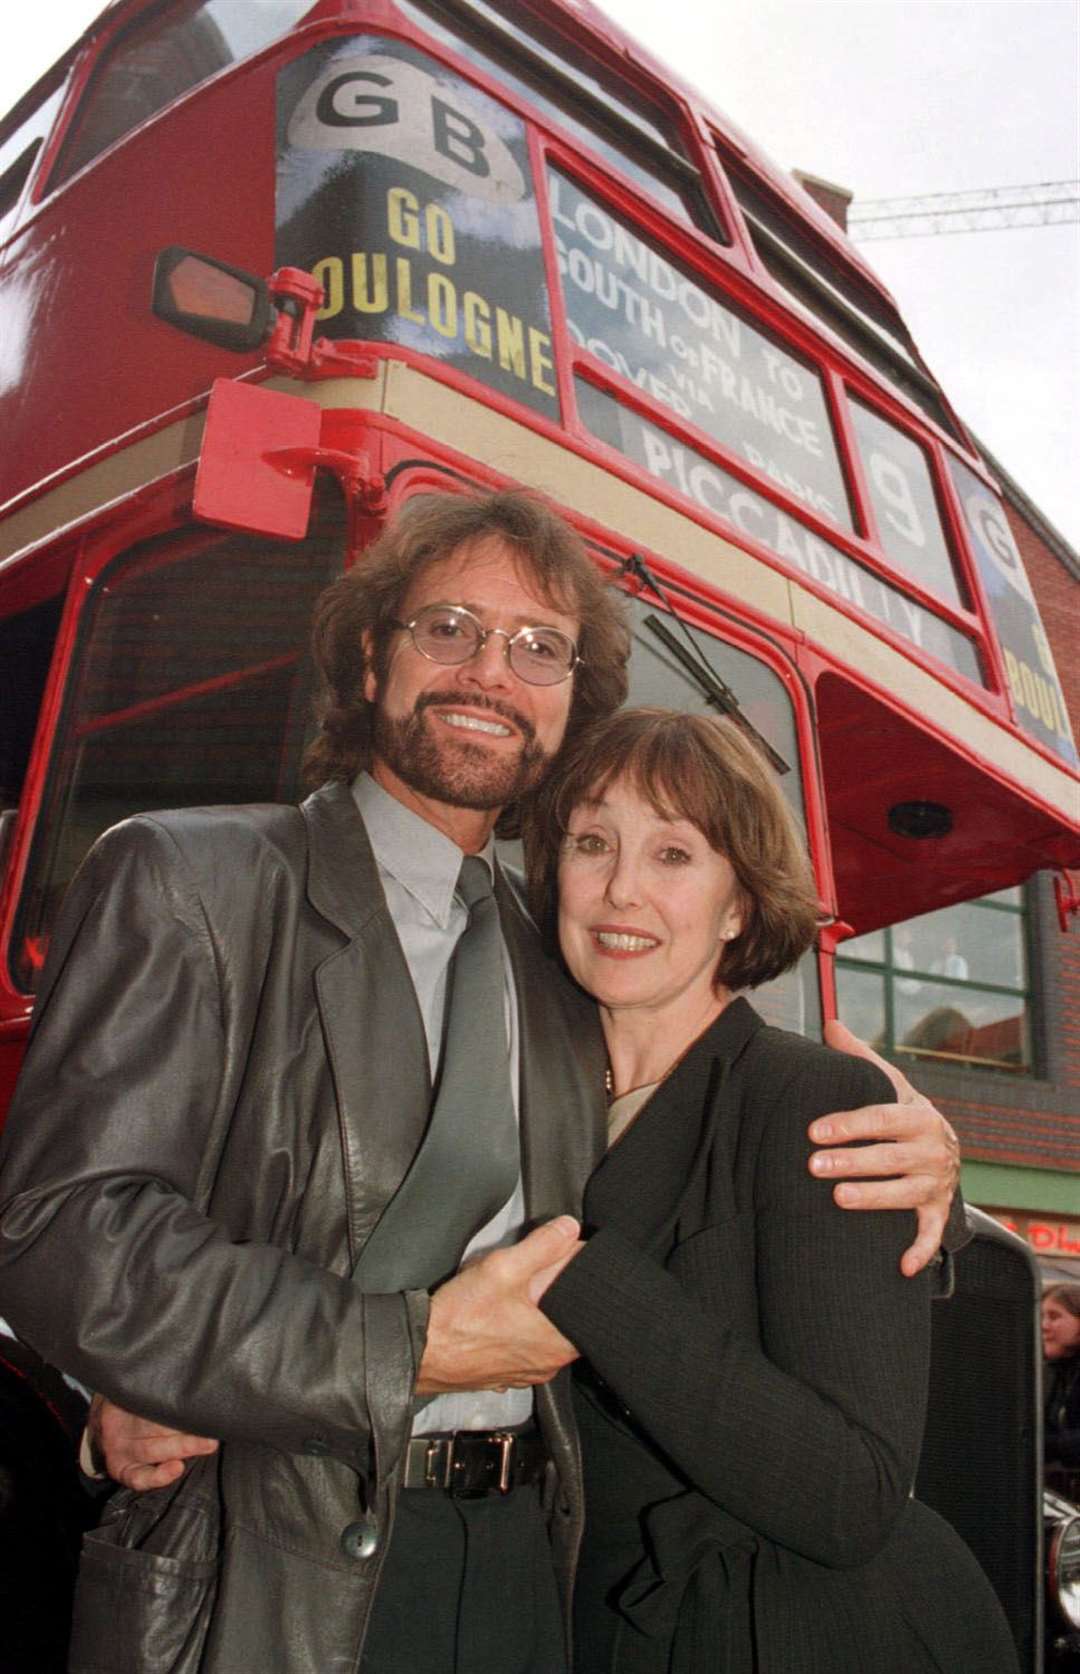 Sir Cliff Richard with Una Stubbs (Barry Batchelor/PA)